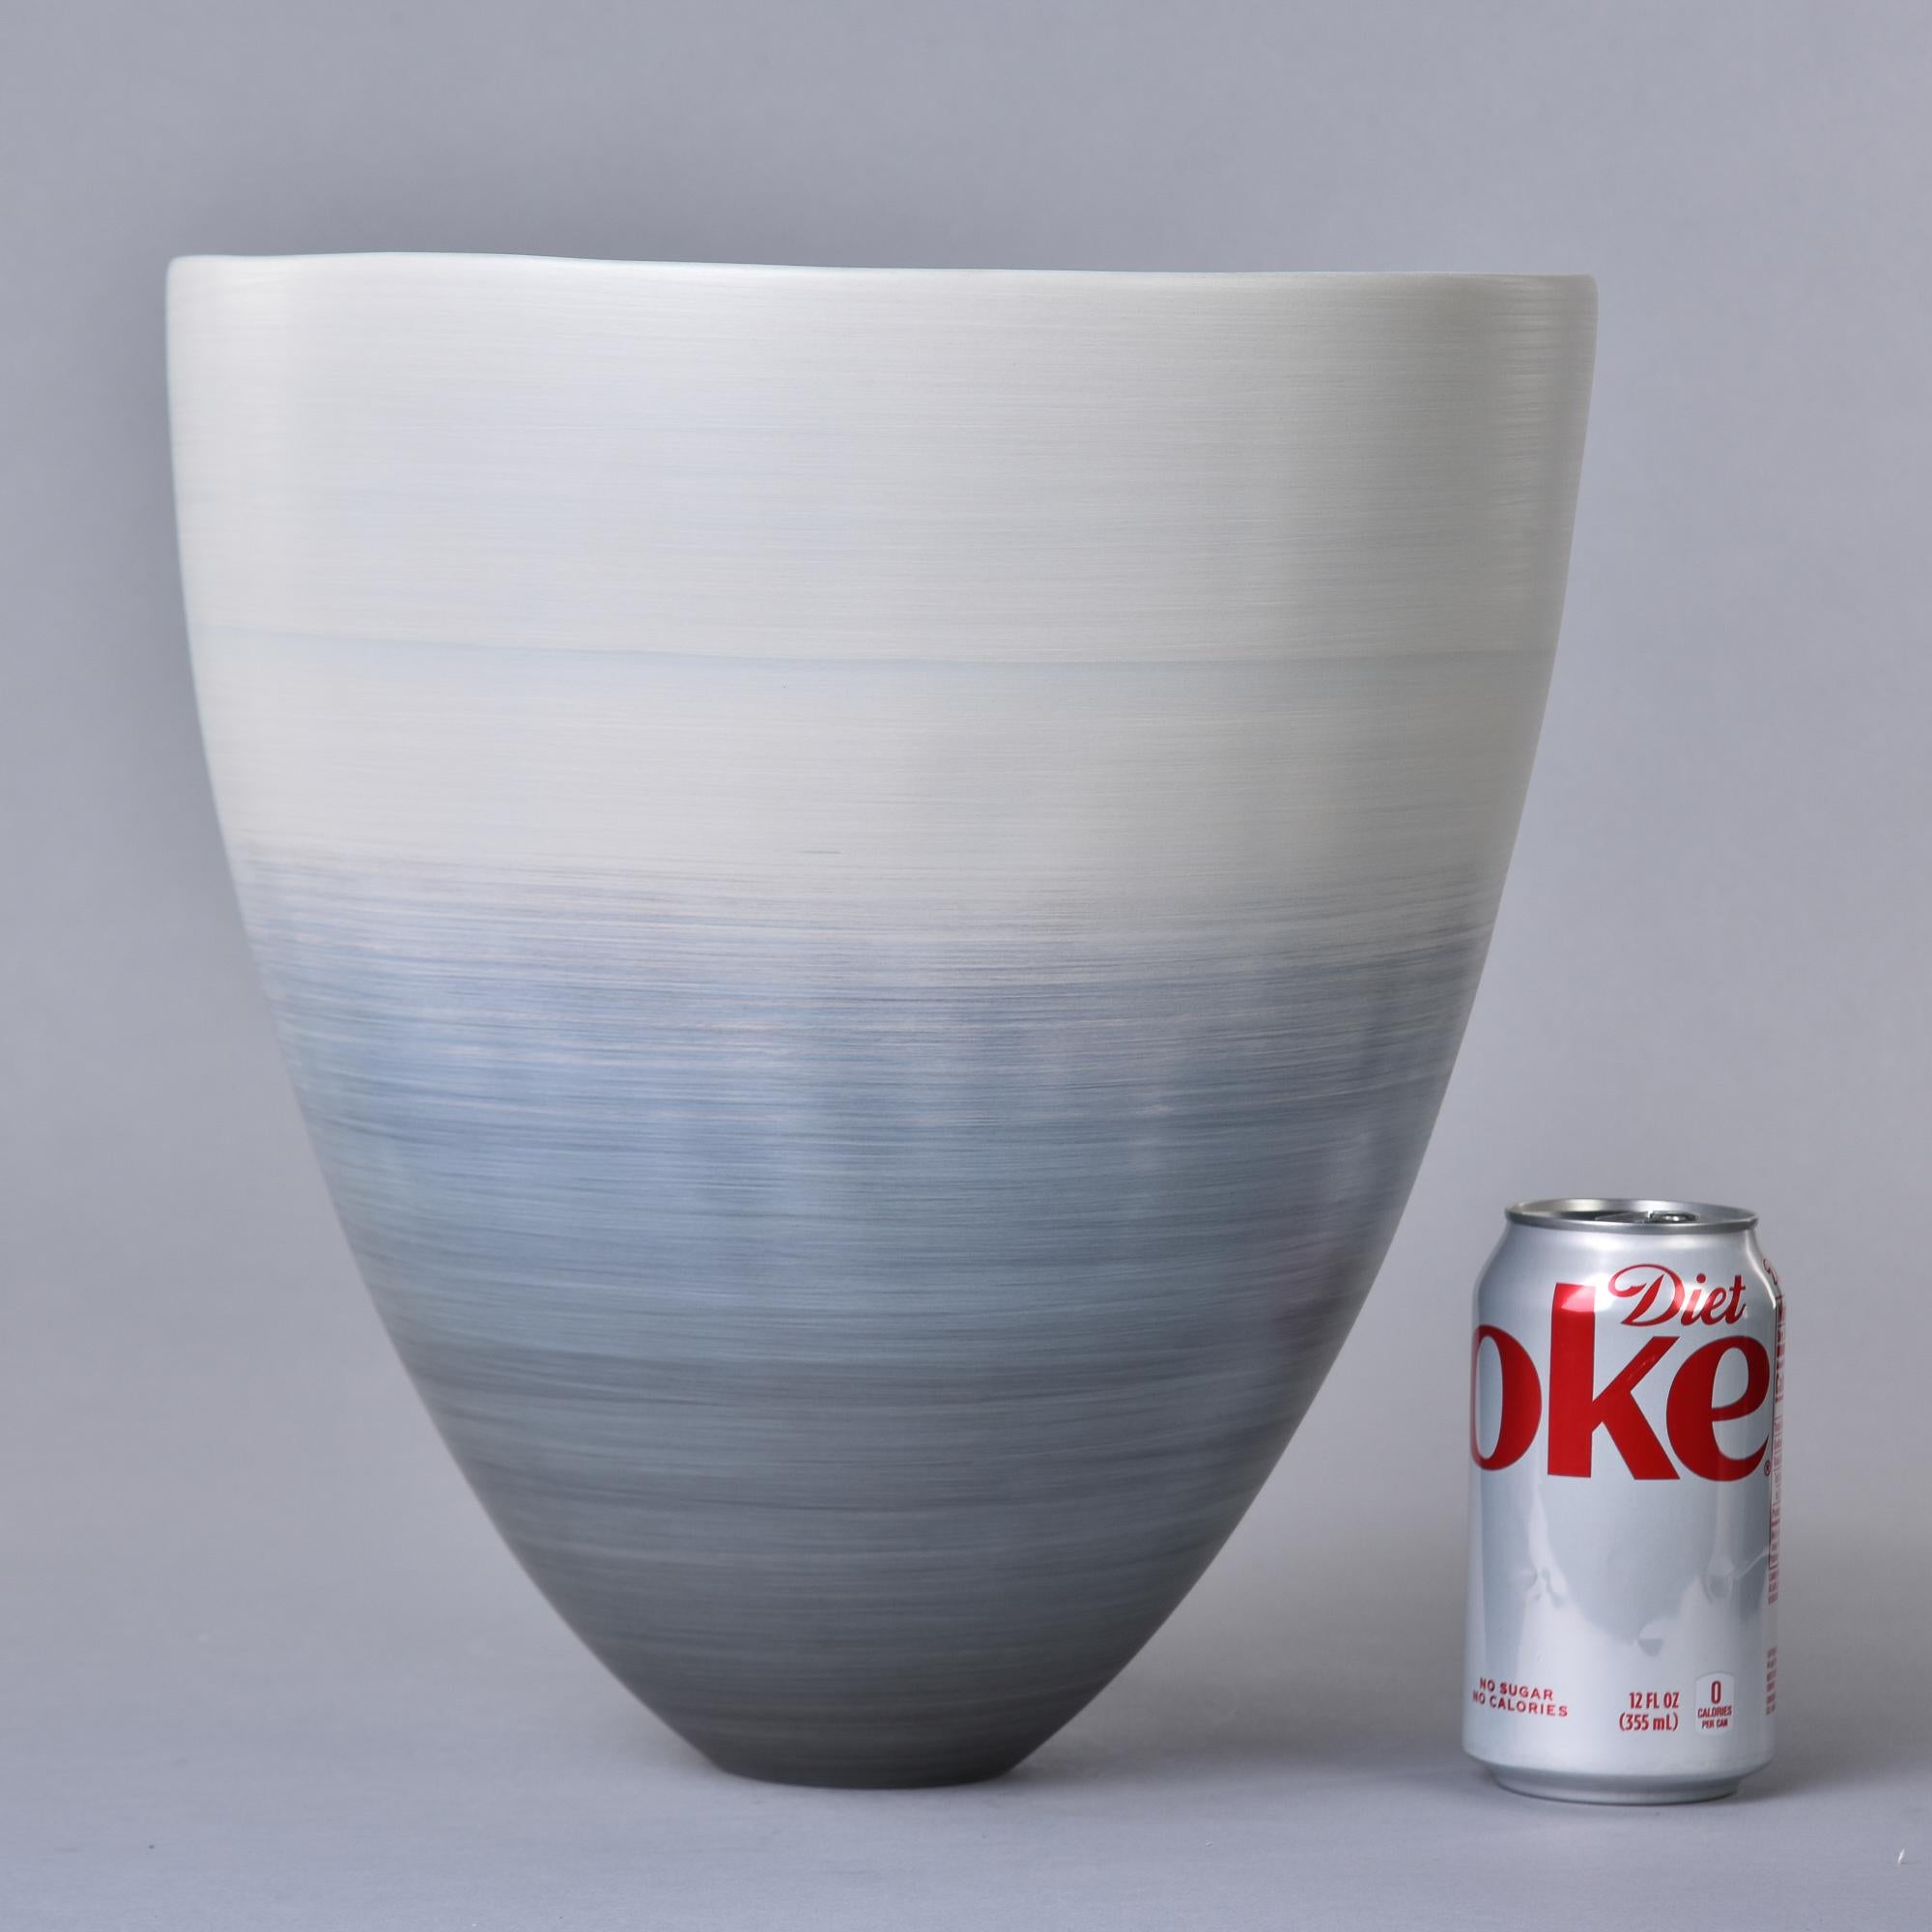 New and hand made in Italy by Rina Menardi, this cup-form bowl or vase stands 12” tall and has an ombre style glaze in shades of blue/gray. Streamlined shape with thin, glazed porcelain walls and an ombre glaze on the inside. Signed by the maker on